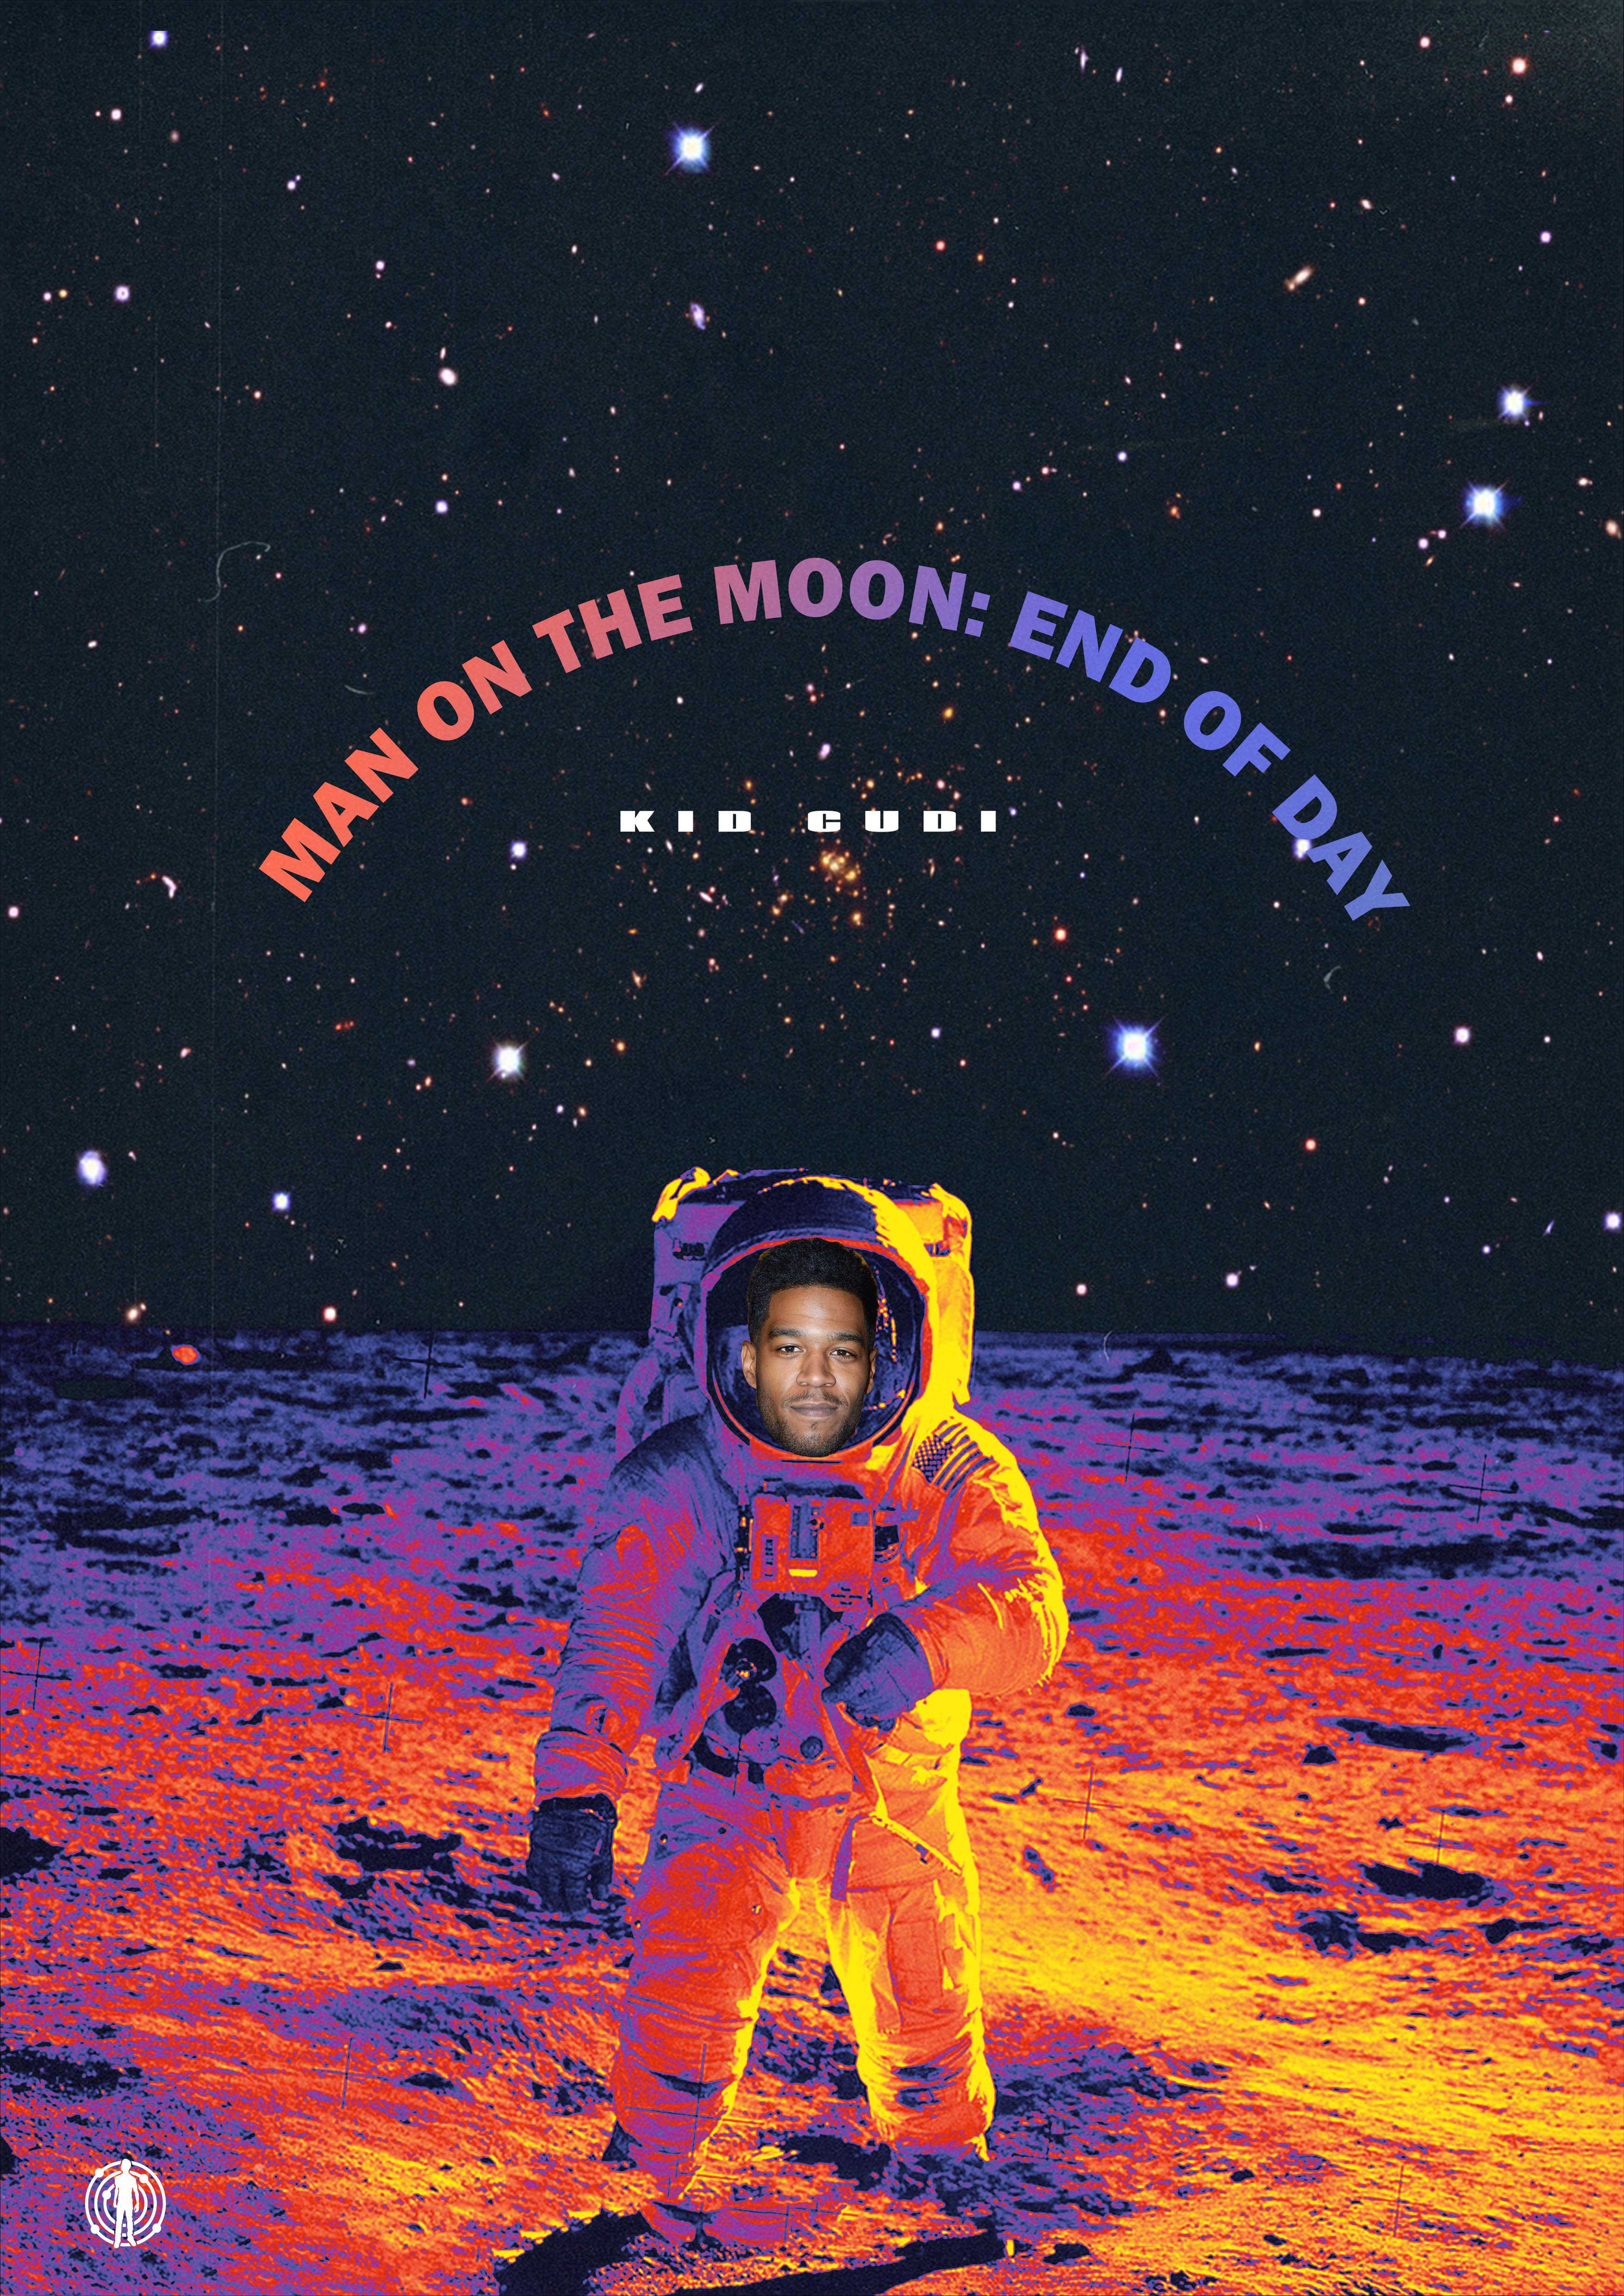 Man on The Moon 3 Wallpaper - KoLPaPer - Awesome Free HD Wallpapers